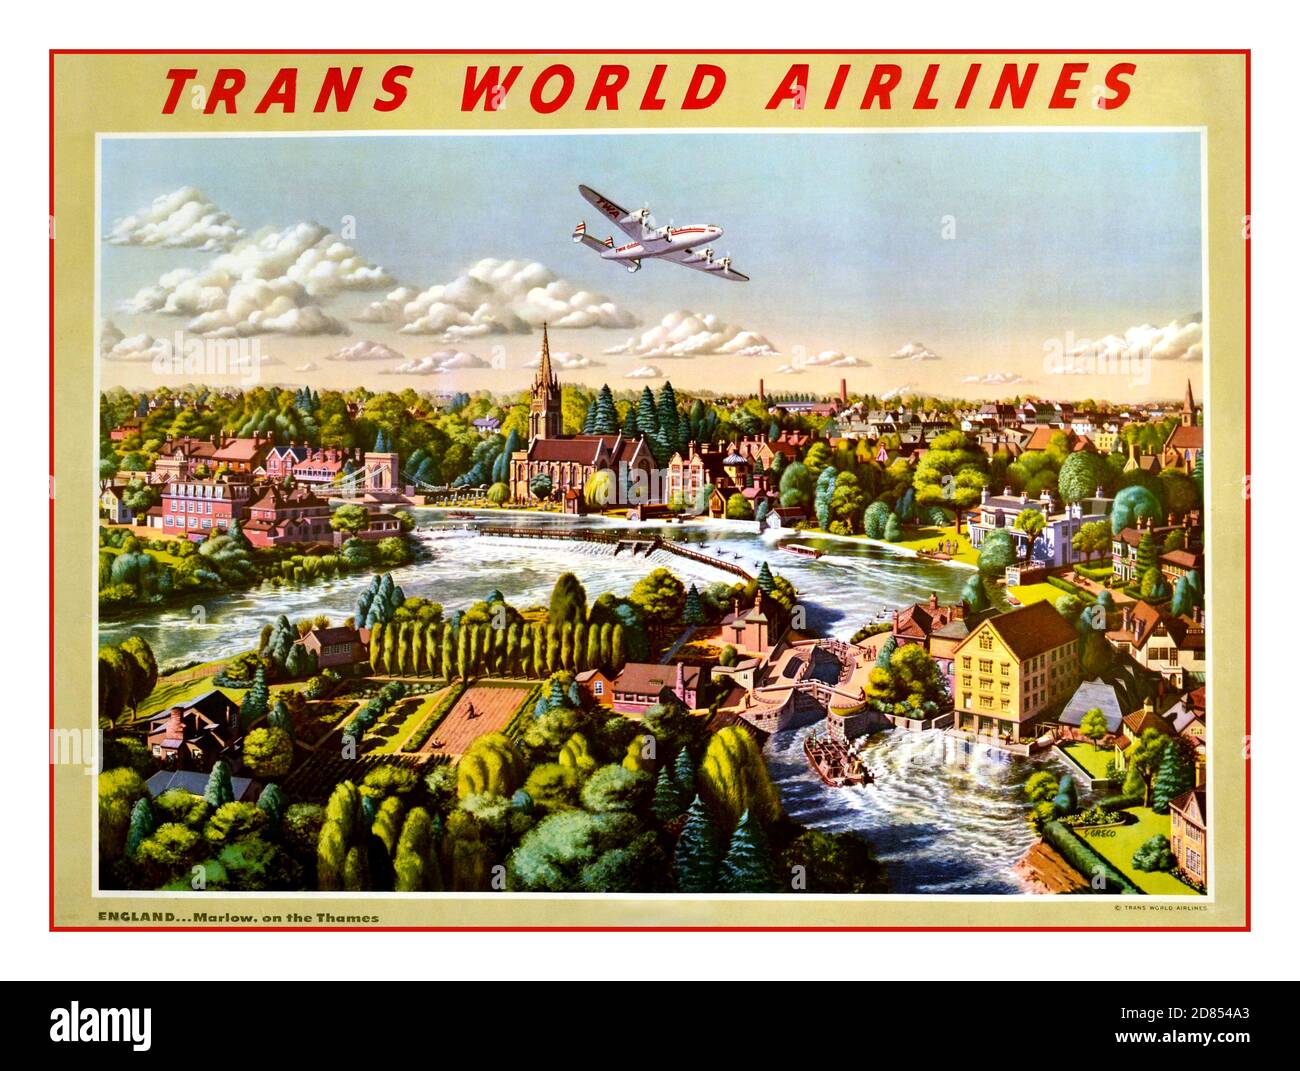 VINTAGE 1940s TRAVEL POSTER TWA AIRLINES MARLOW ENGLAND UK CONSTELLATION AIRCRAFT  Vintage travel advertising poster for Trans World Airlines featuring a painting by S. Greco, of Marlow On The Thames, a town in Buckinghamshire, UK with a TWA Lockheed Constellation plane flying above it. Trans World Airlines (TWA) was a major American airline which operated from 1930 until 2001. Stock Photo